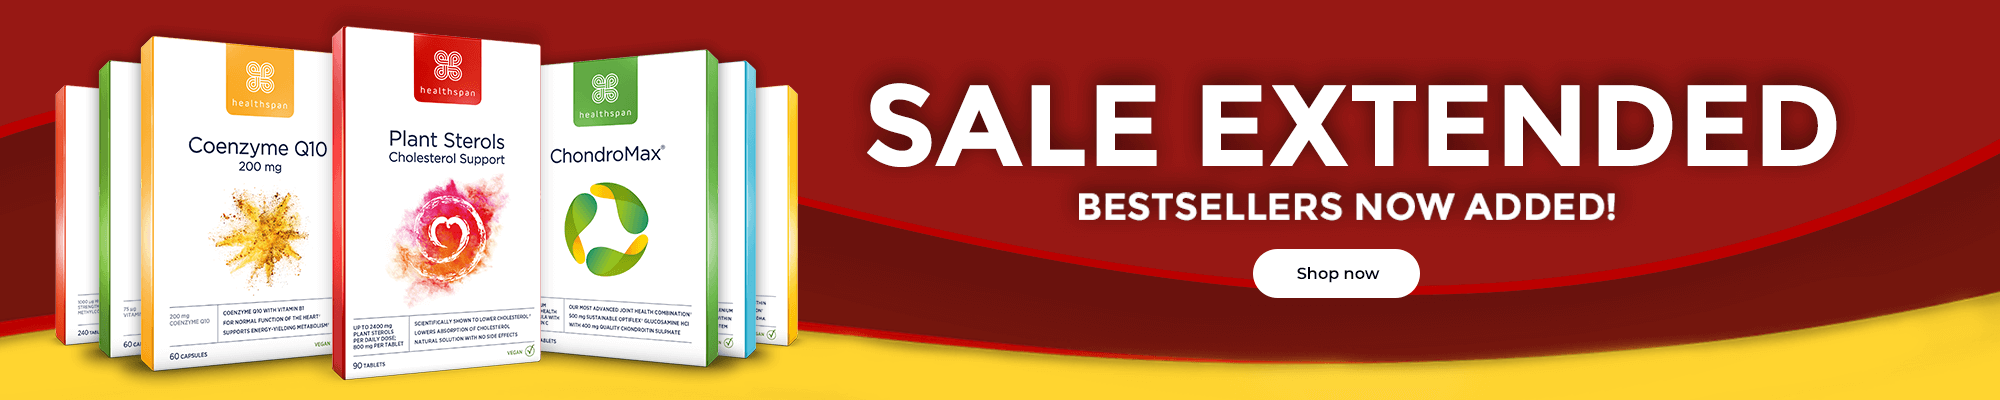 Sale extended, bestsellers now added! Shop now